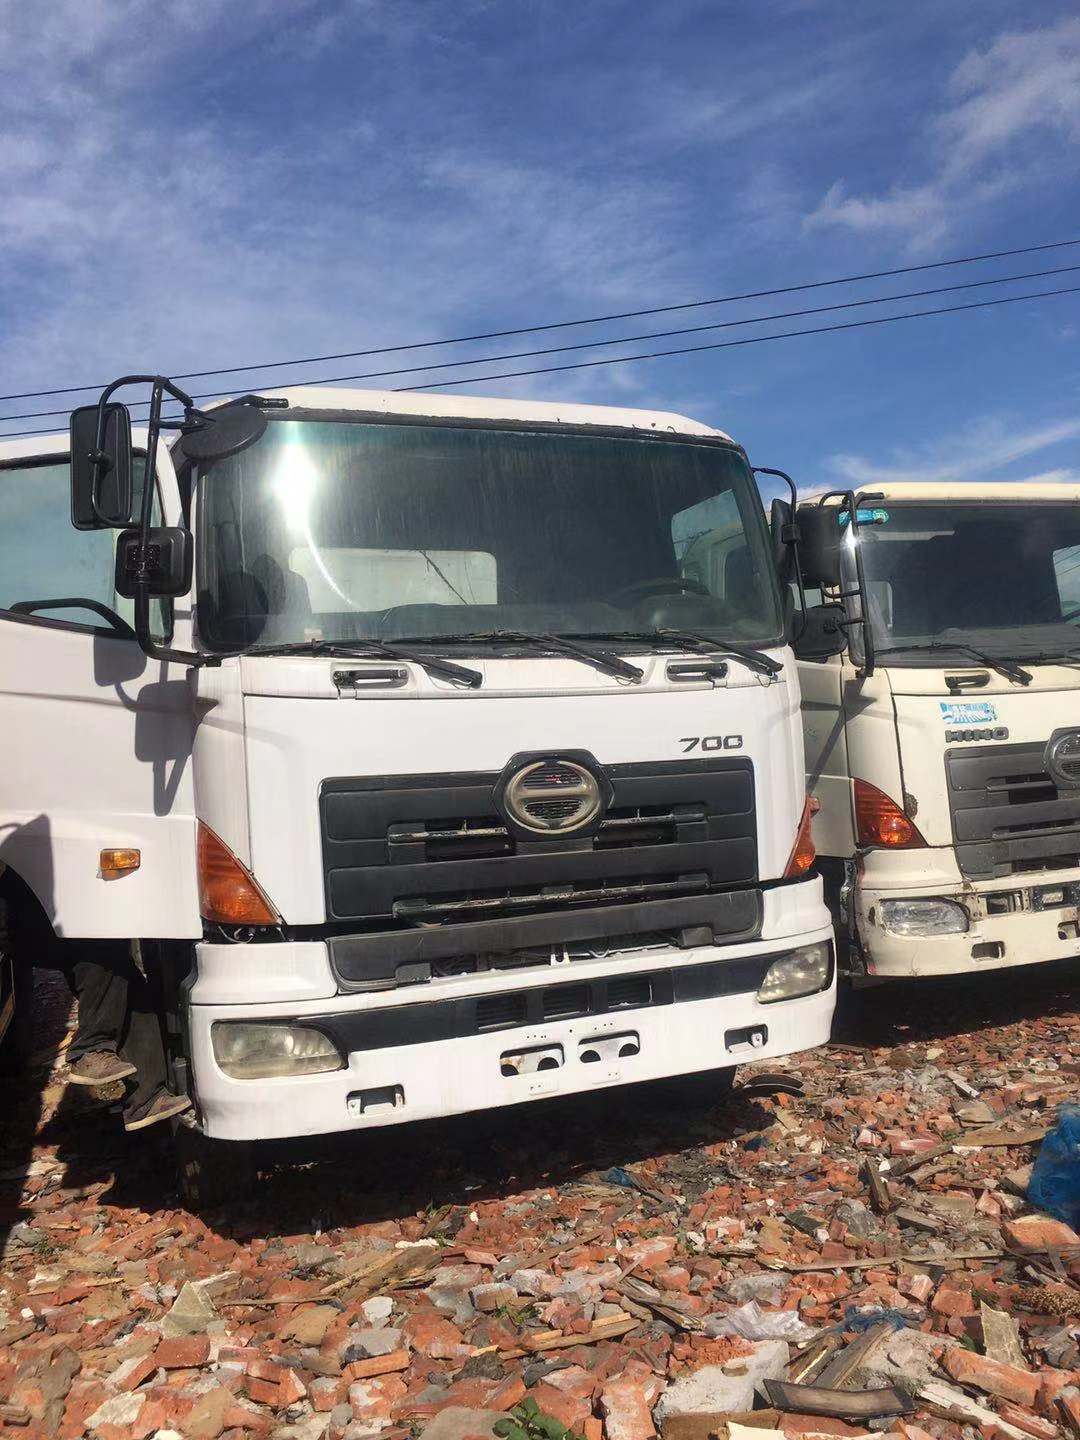 Used Hino 700 Dump Truck in High Quality with Good Condition in Low Price